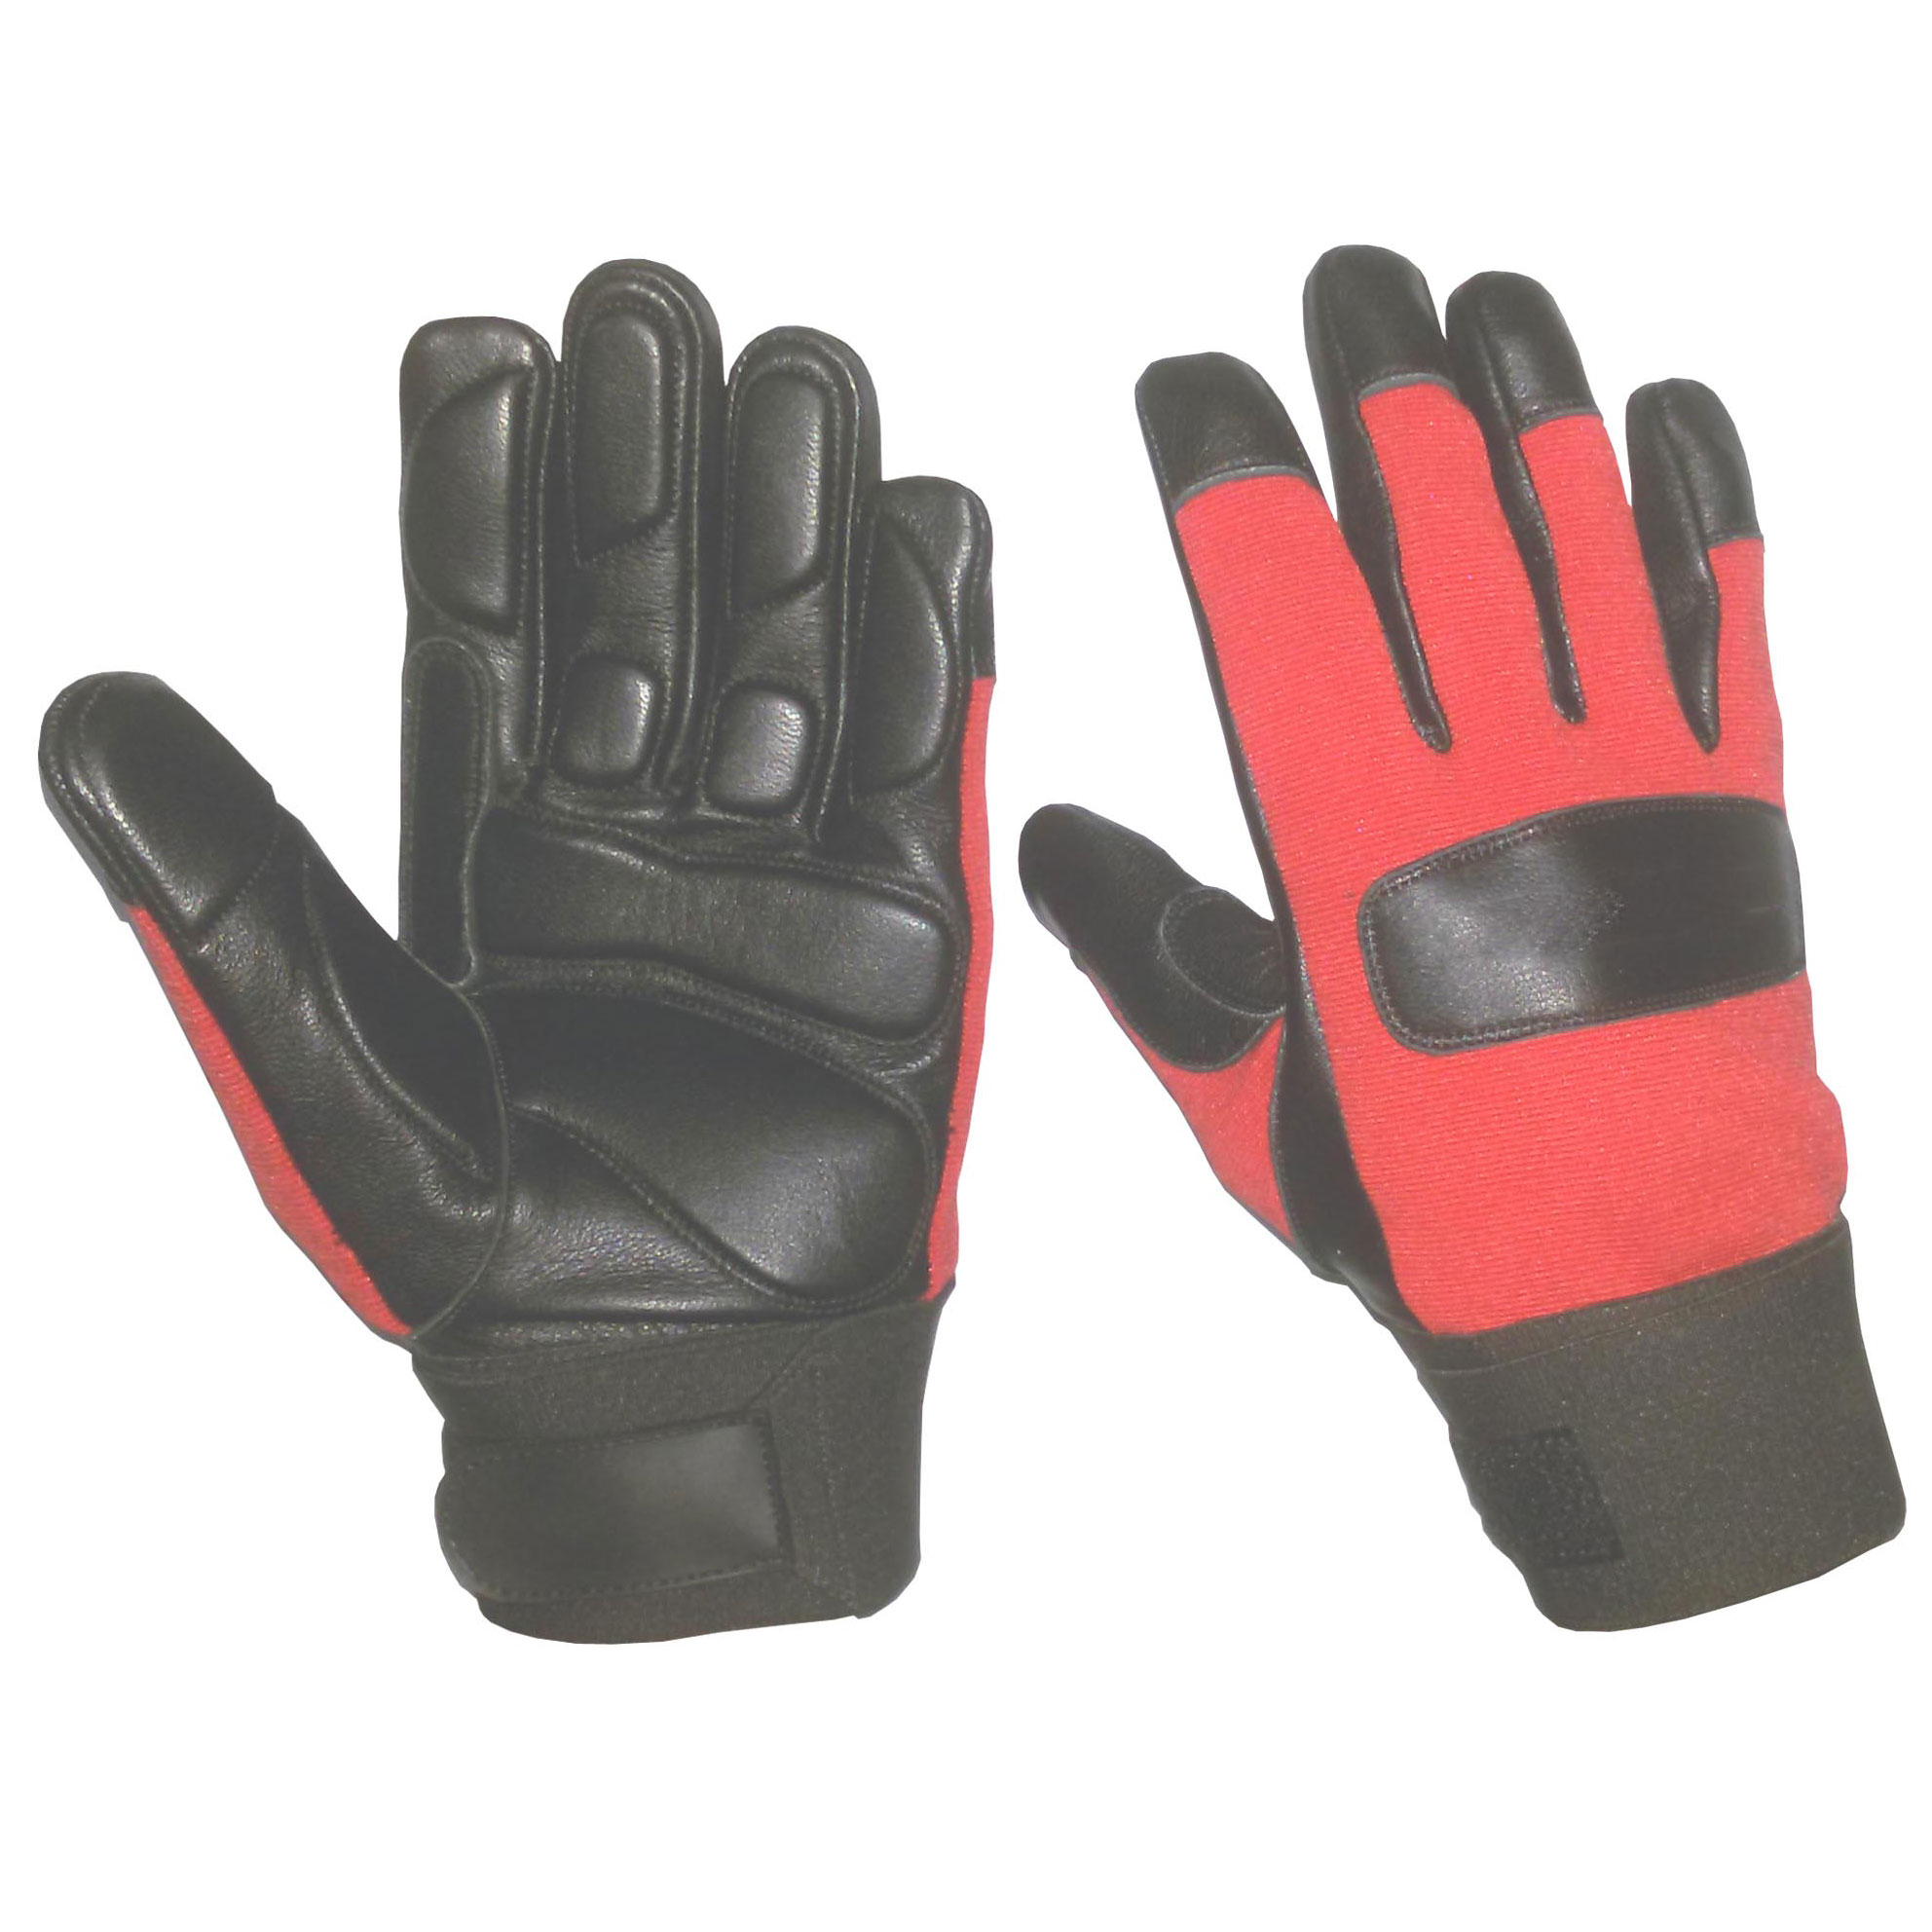 Mechanic Gloves for Pneumatic tool Power Gloves in Goat Leather Anti Vibration Working Gloves Protection